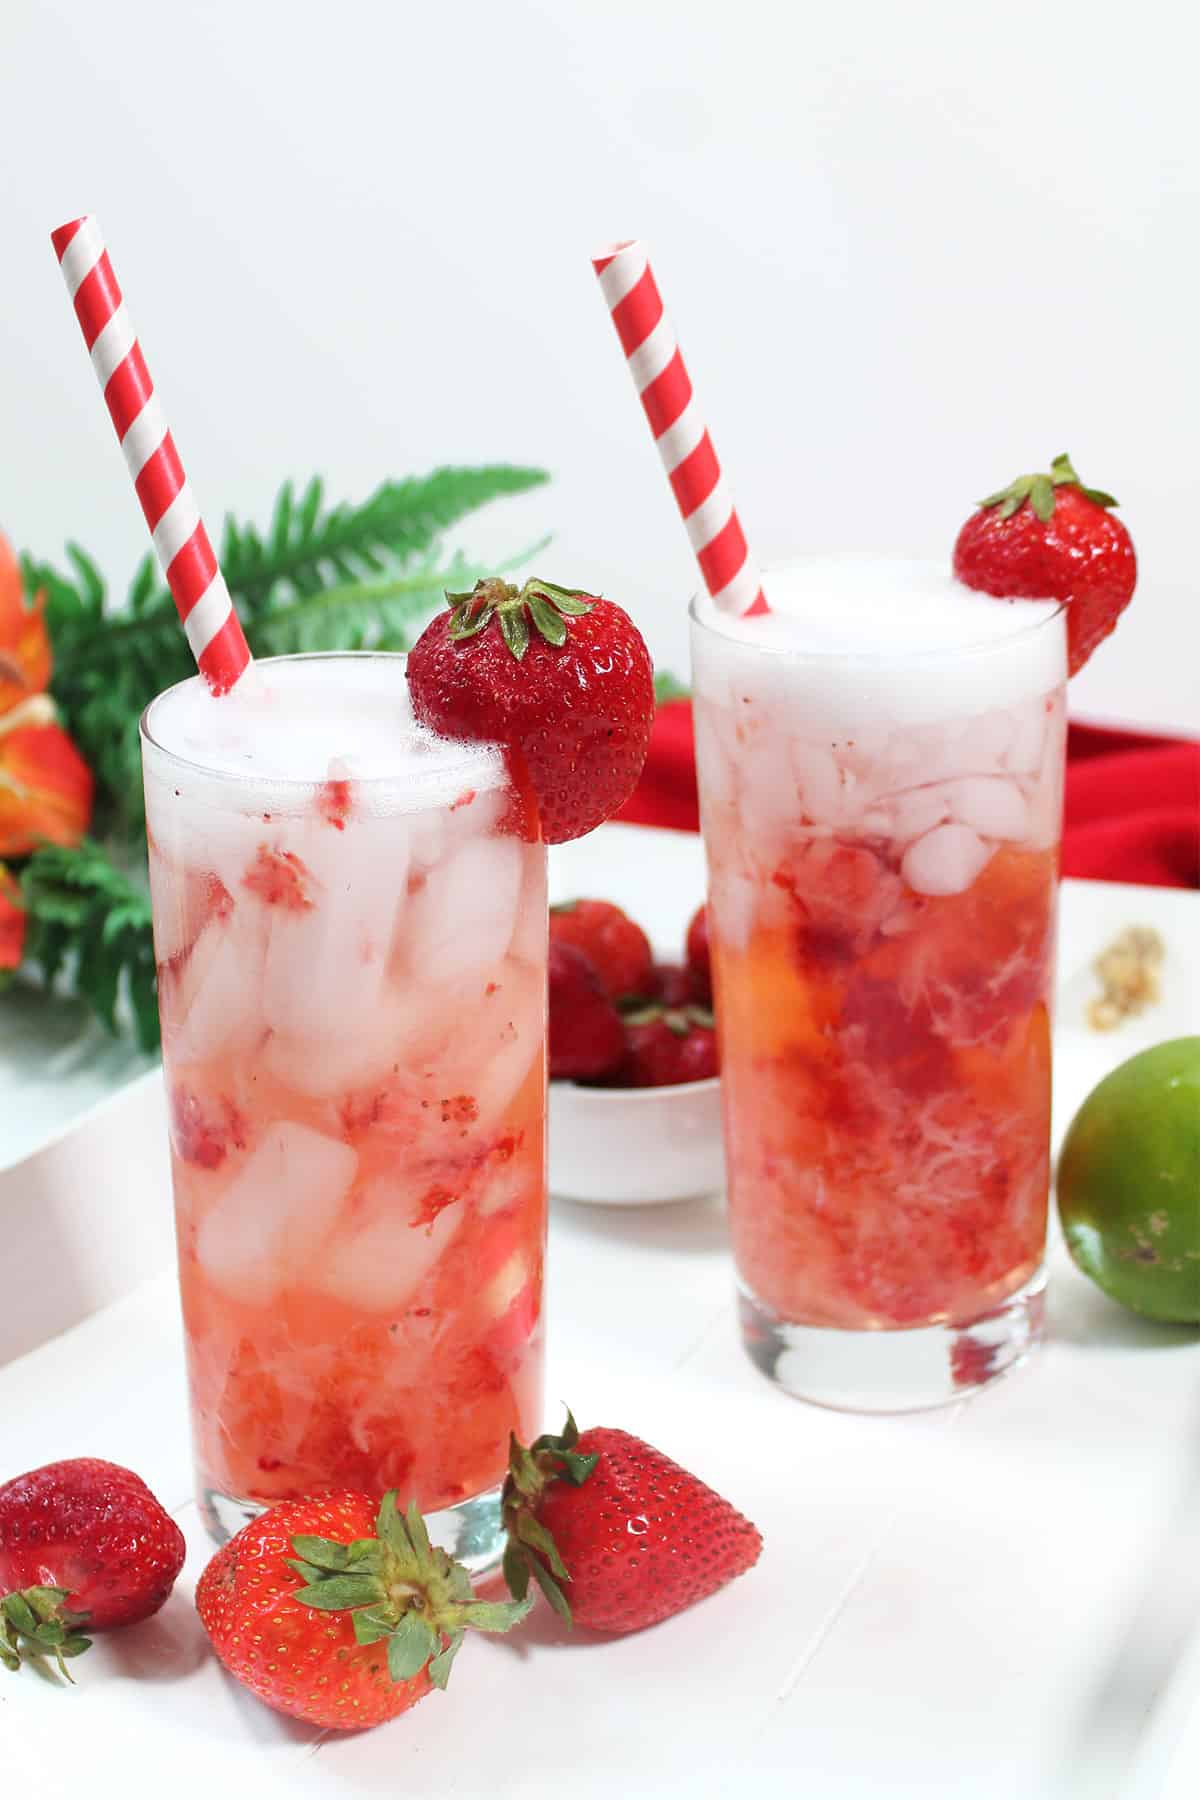 Two Strawberry Cocktails with strawberries around.